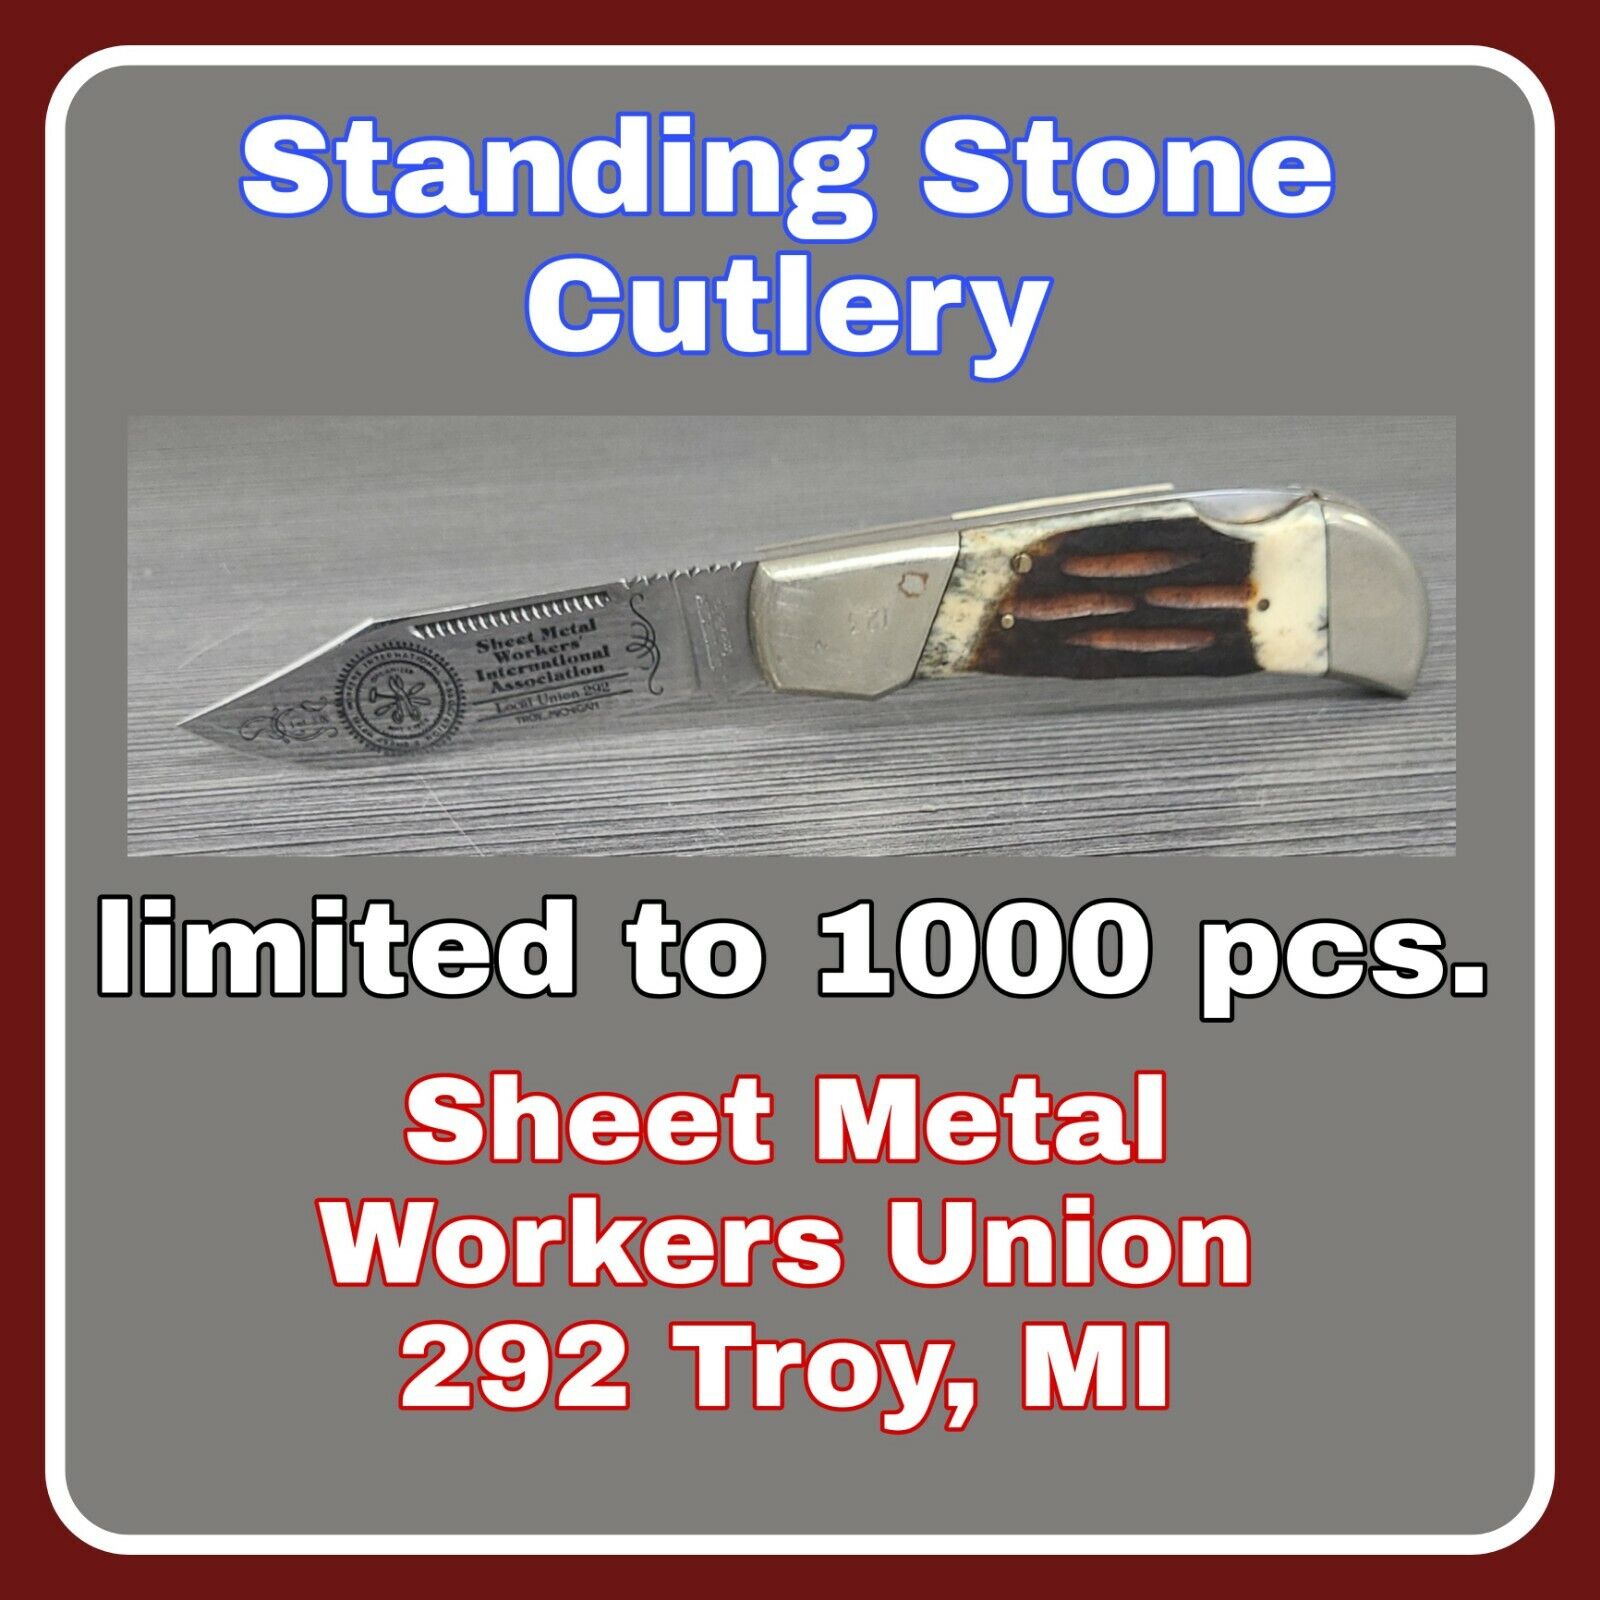 sheet metal workers 292 troy, michigan standing stone rare pocket knife 1 / 1000